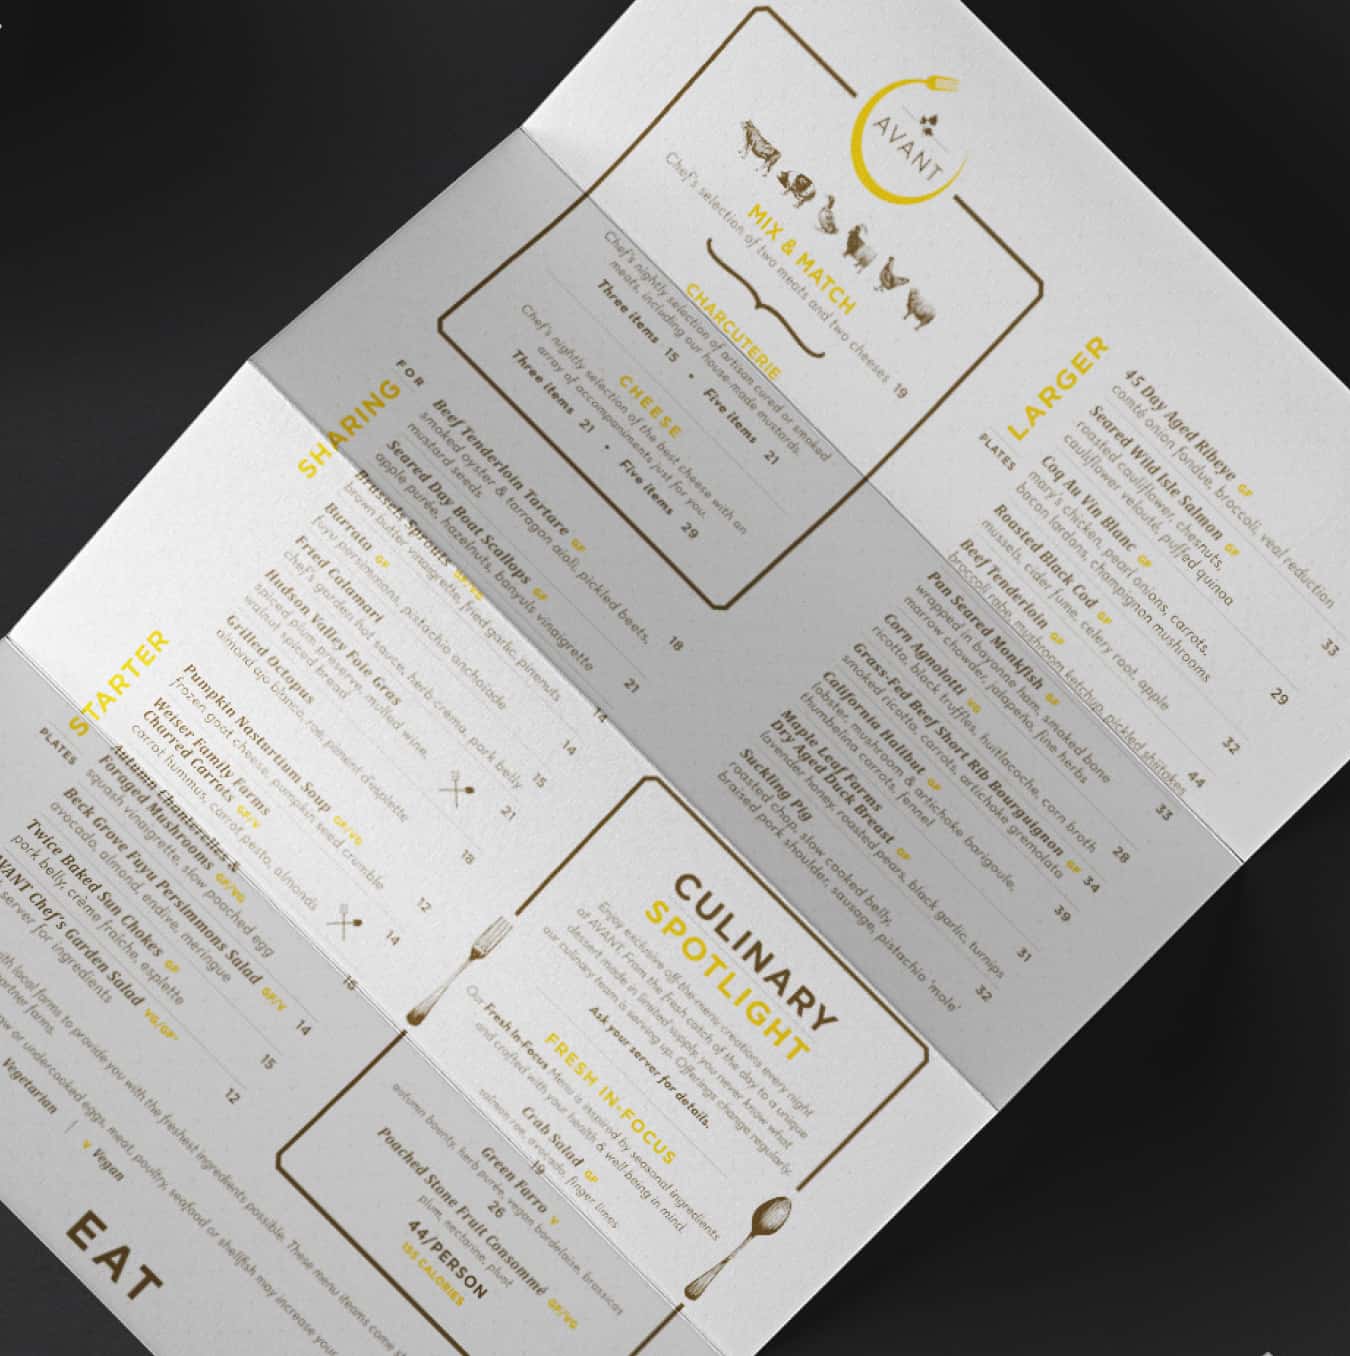 A trifold menu for 'AVANT' restaurant open on a tabletop, showing various gourmet food options categorized under starters, mains, and culinary specials.